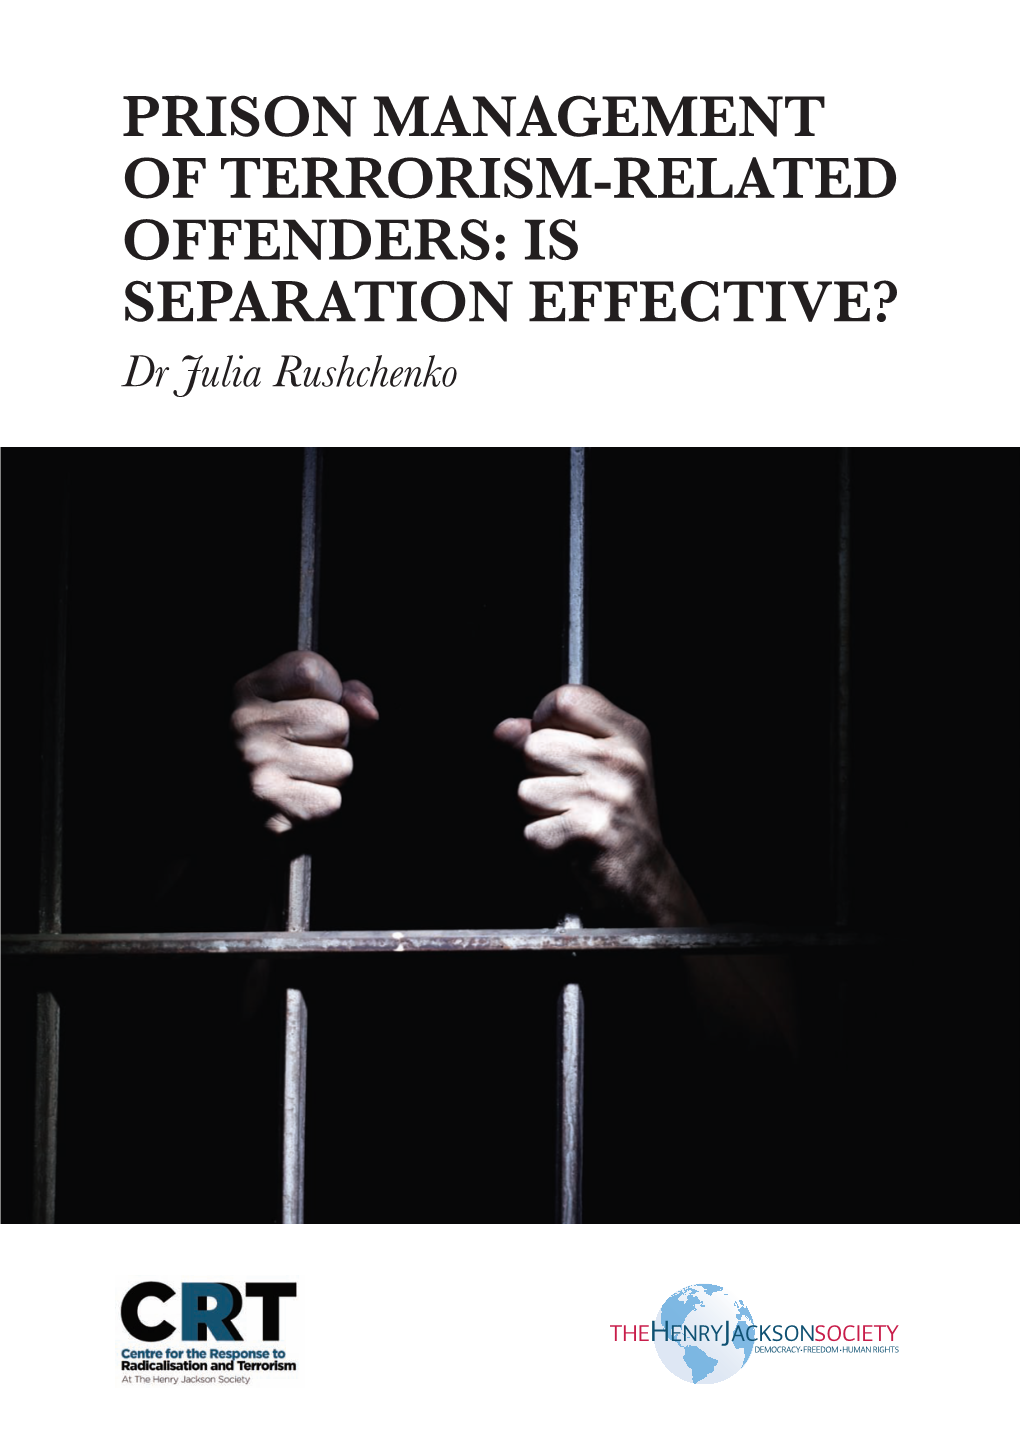 Prison Management of Terrorism-Related Offenders